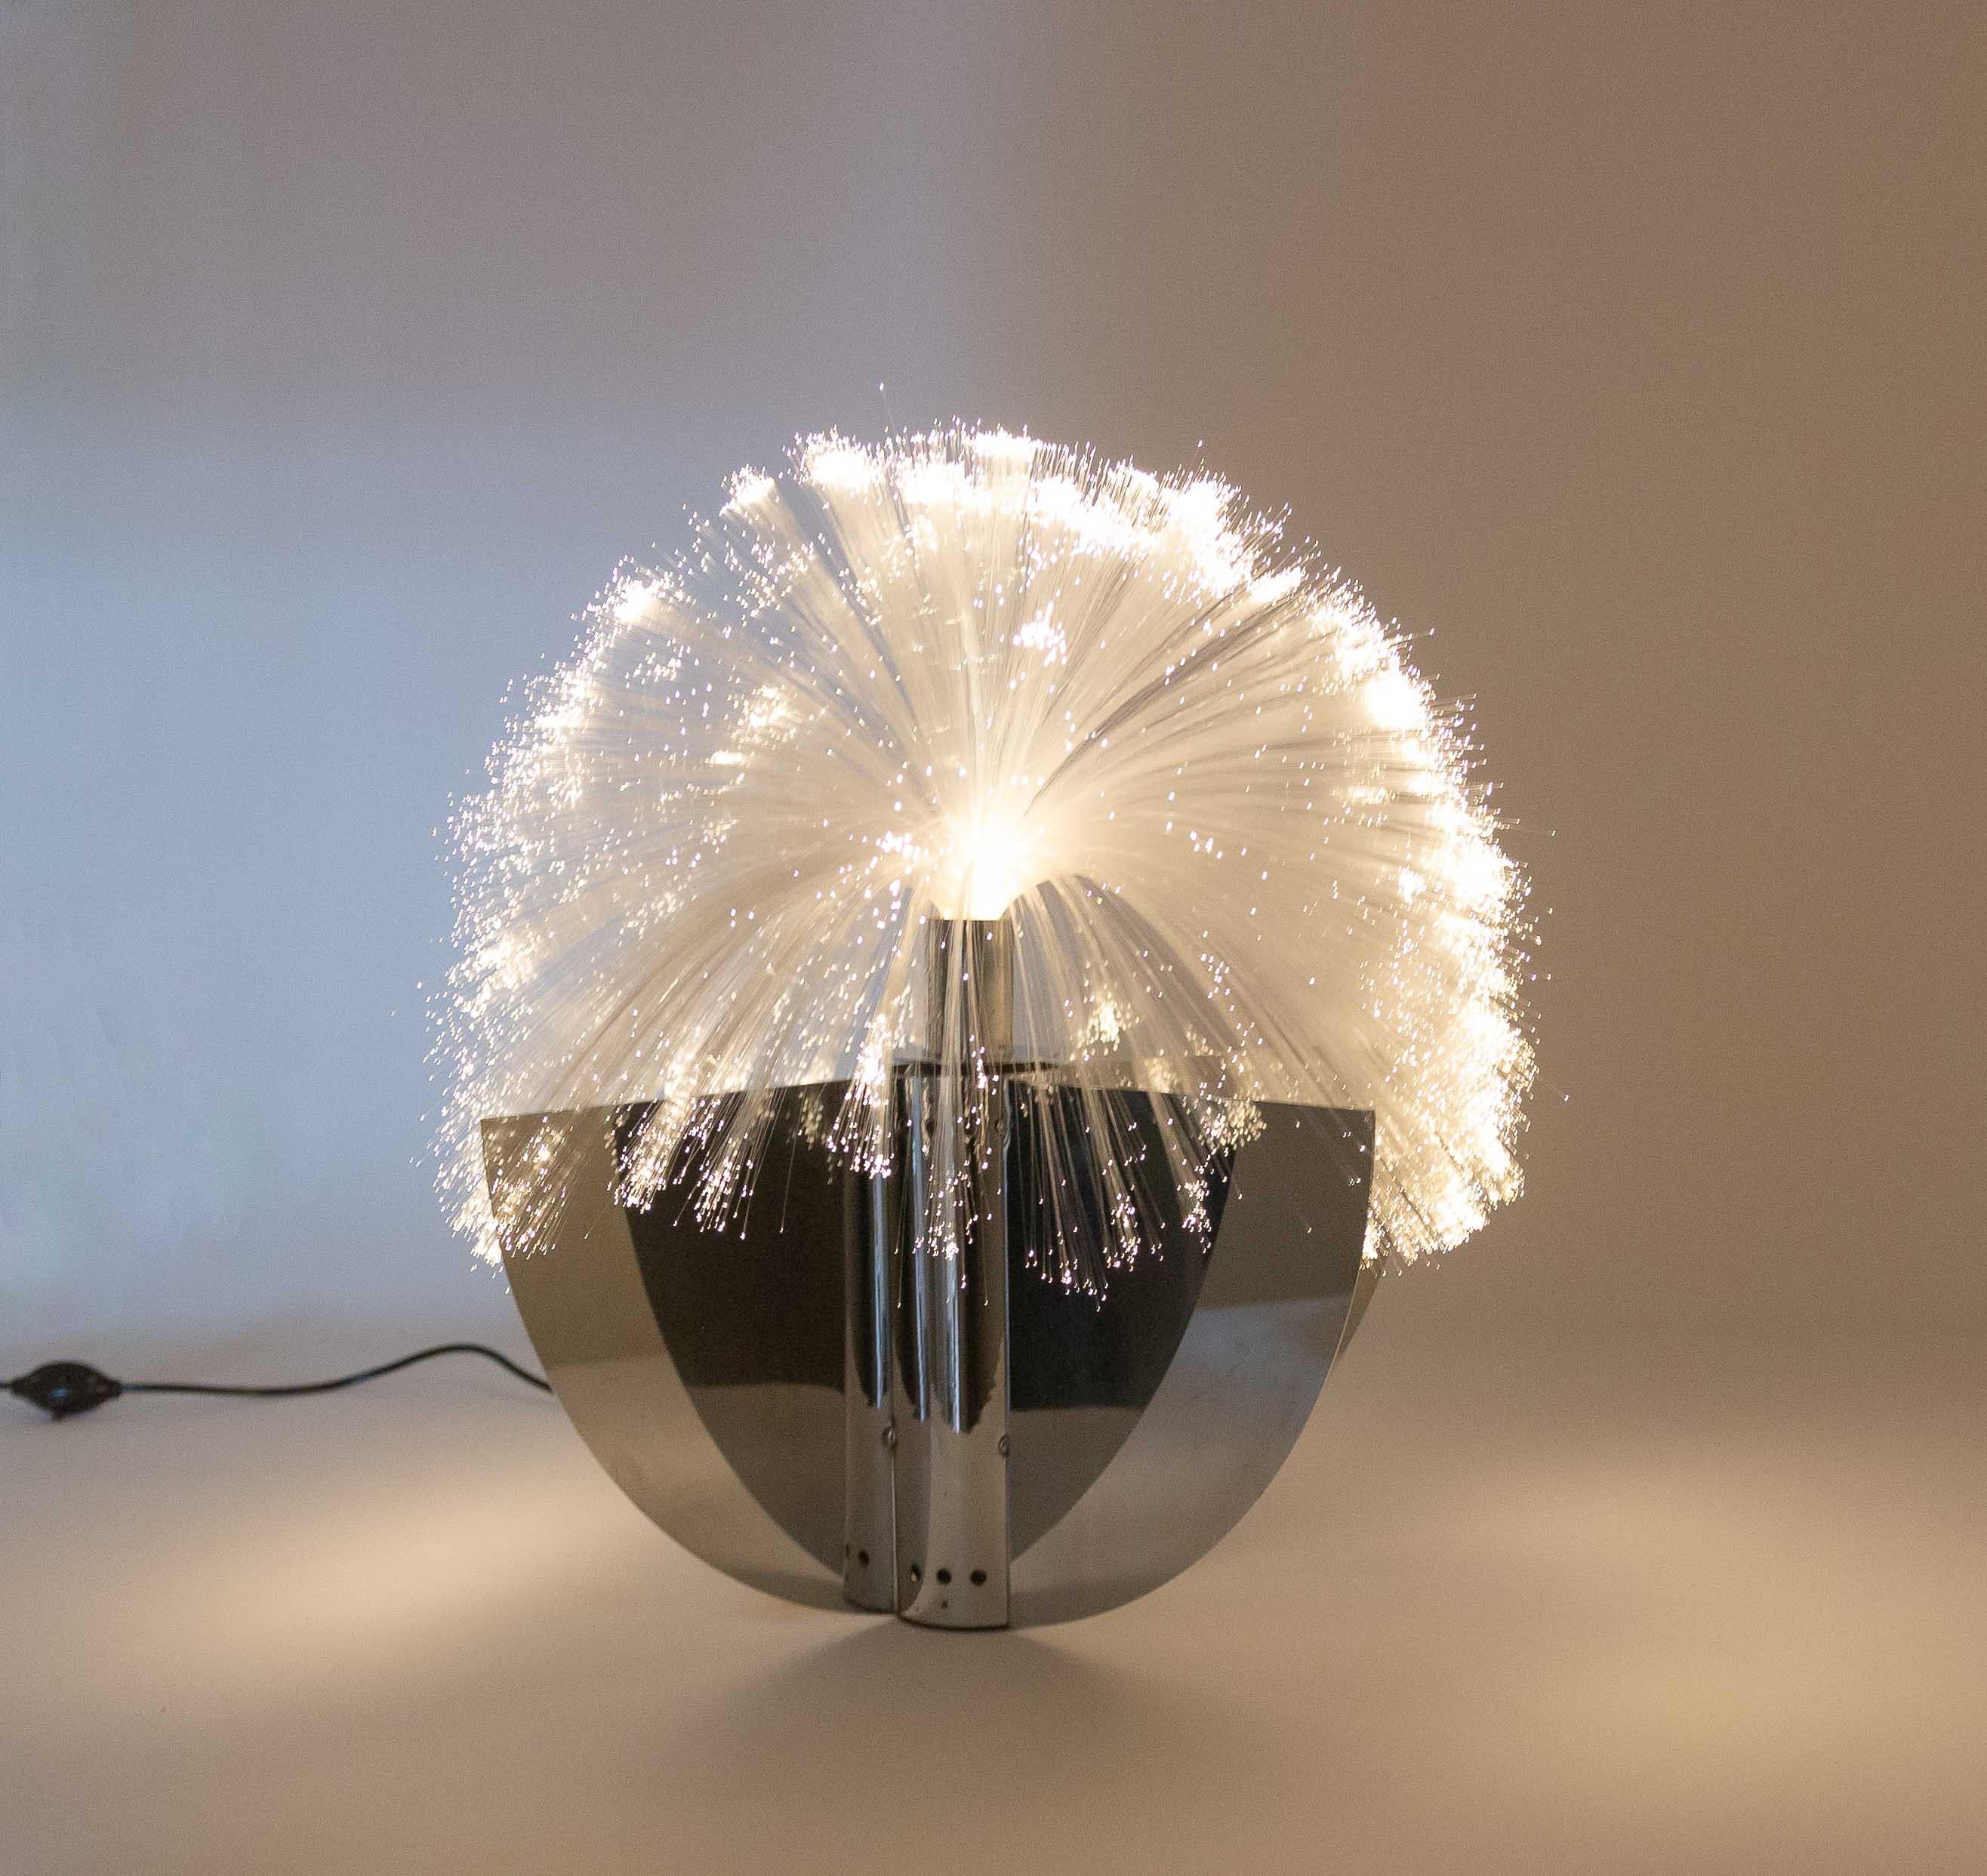 Model 8,5 table lamp with optic fibres designed by Jürgen Fischer for Zanotta in 1969.

As described by Fulvio and Napoleone Ferrari in their book 